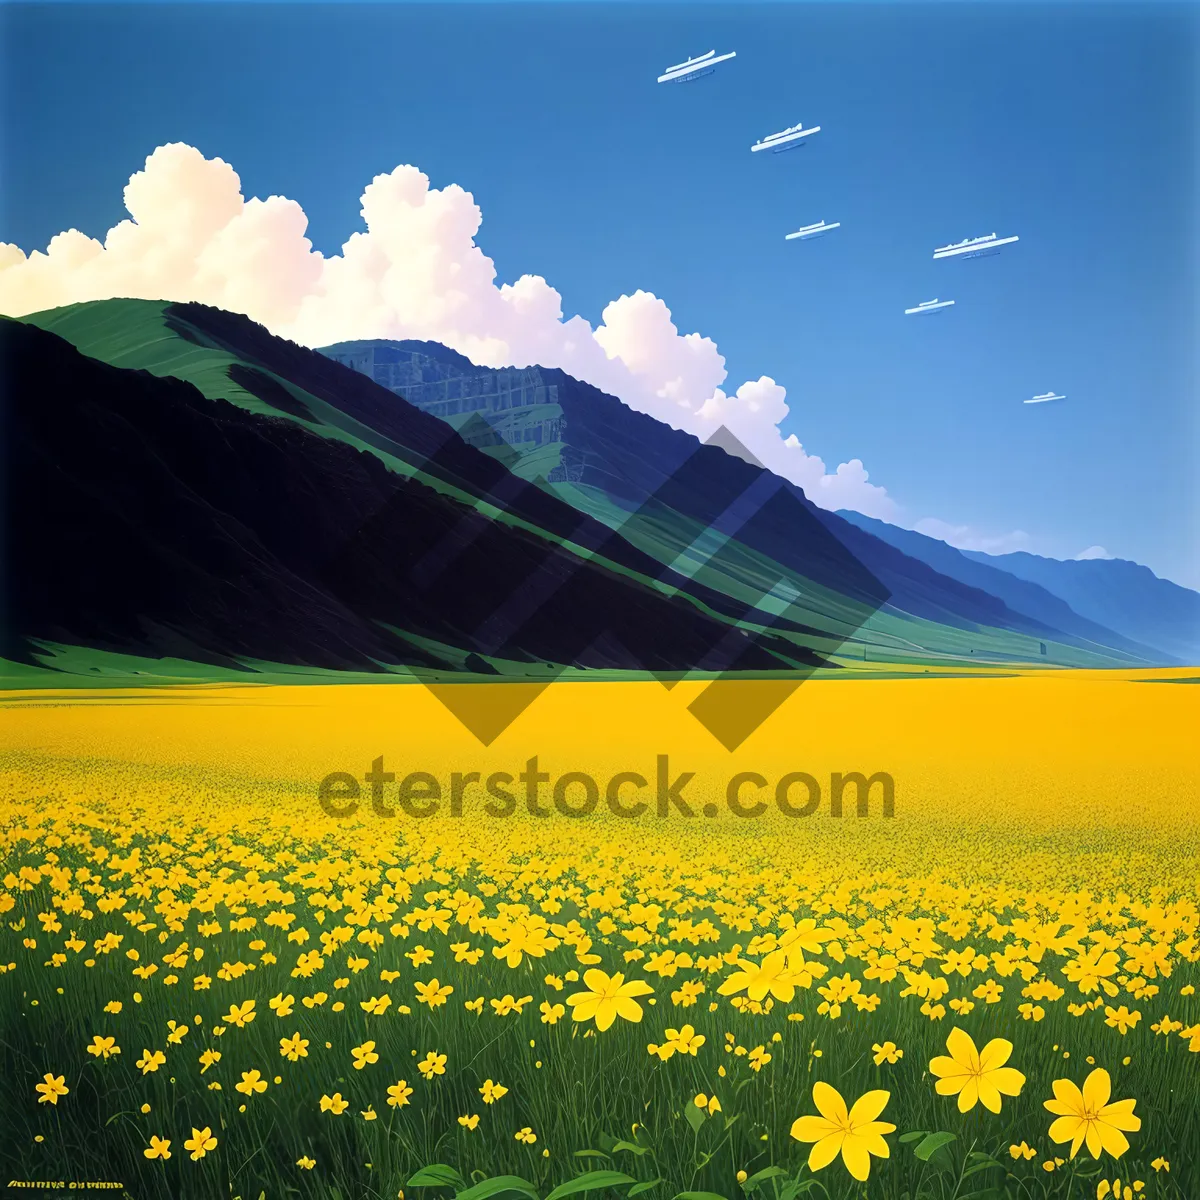 Picture of Sunlit Fields of Yellow Blossoms: A Vibrant Landscape